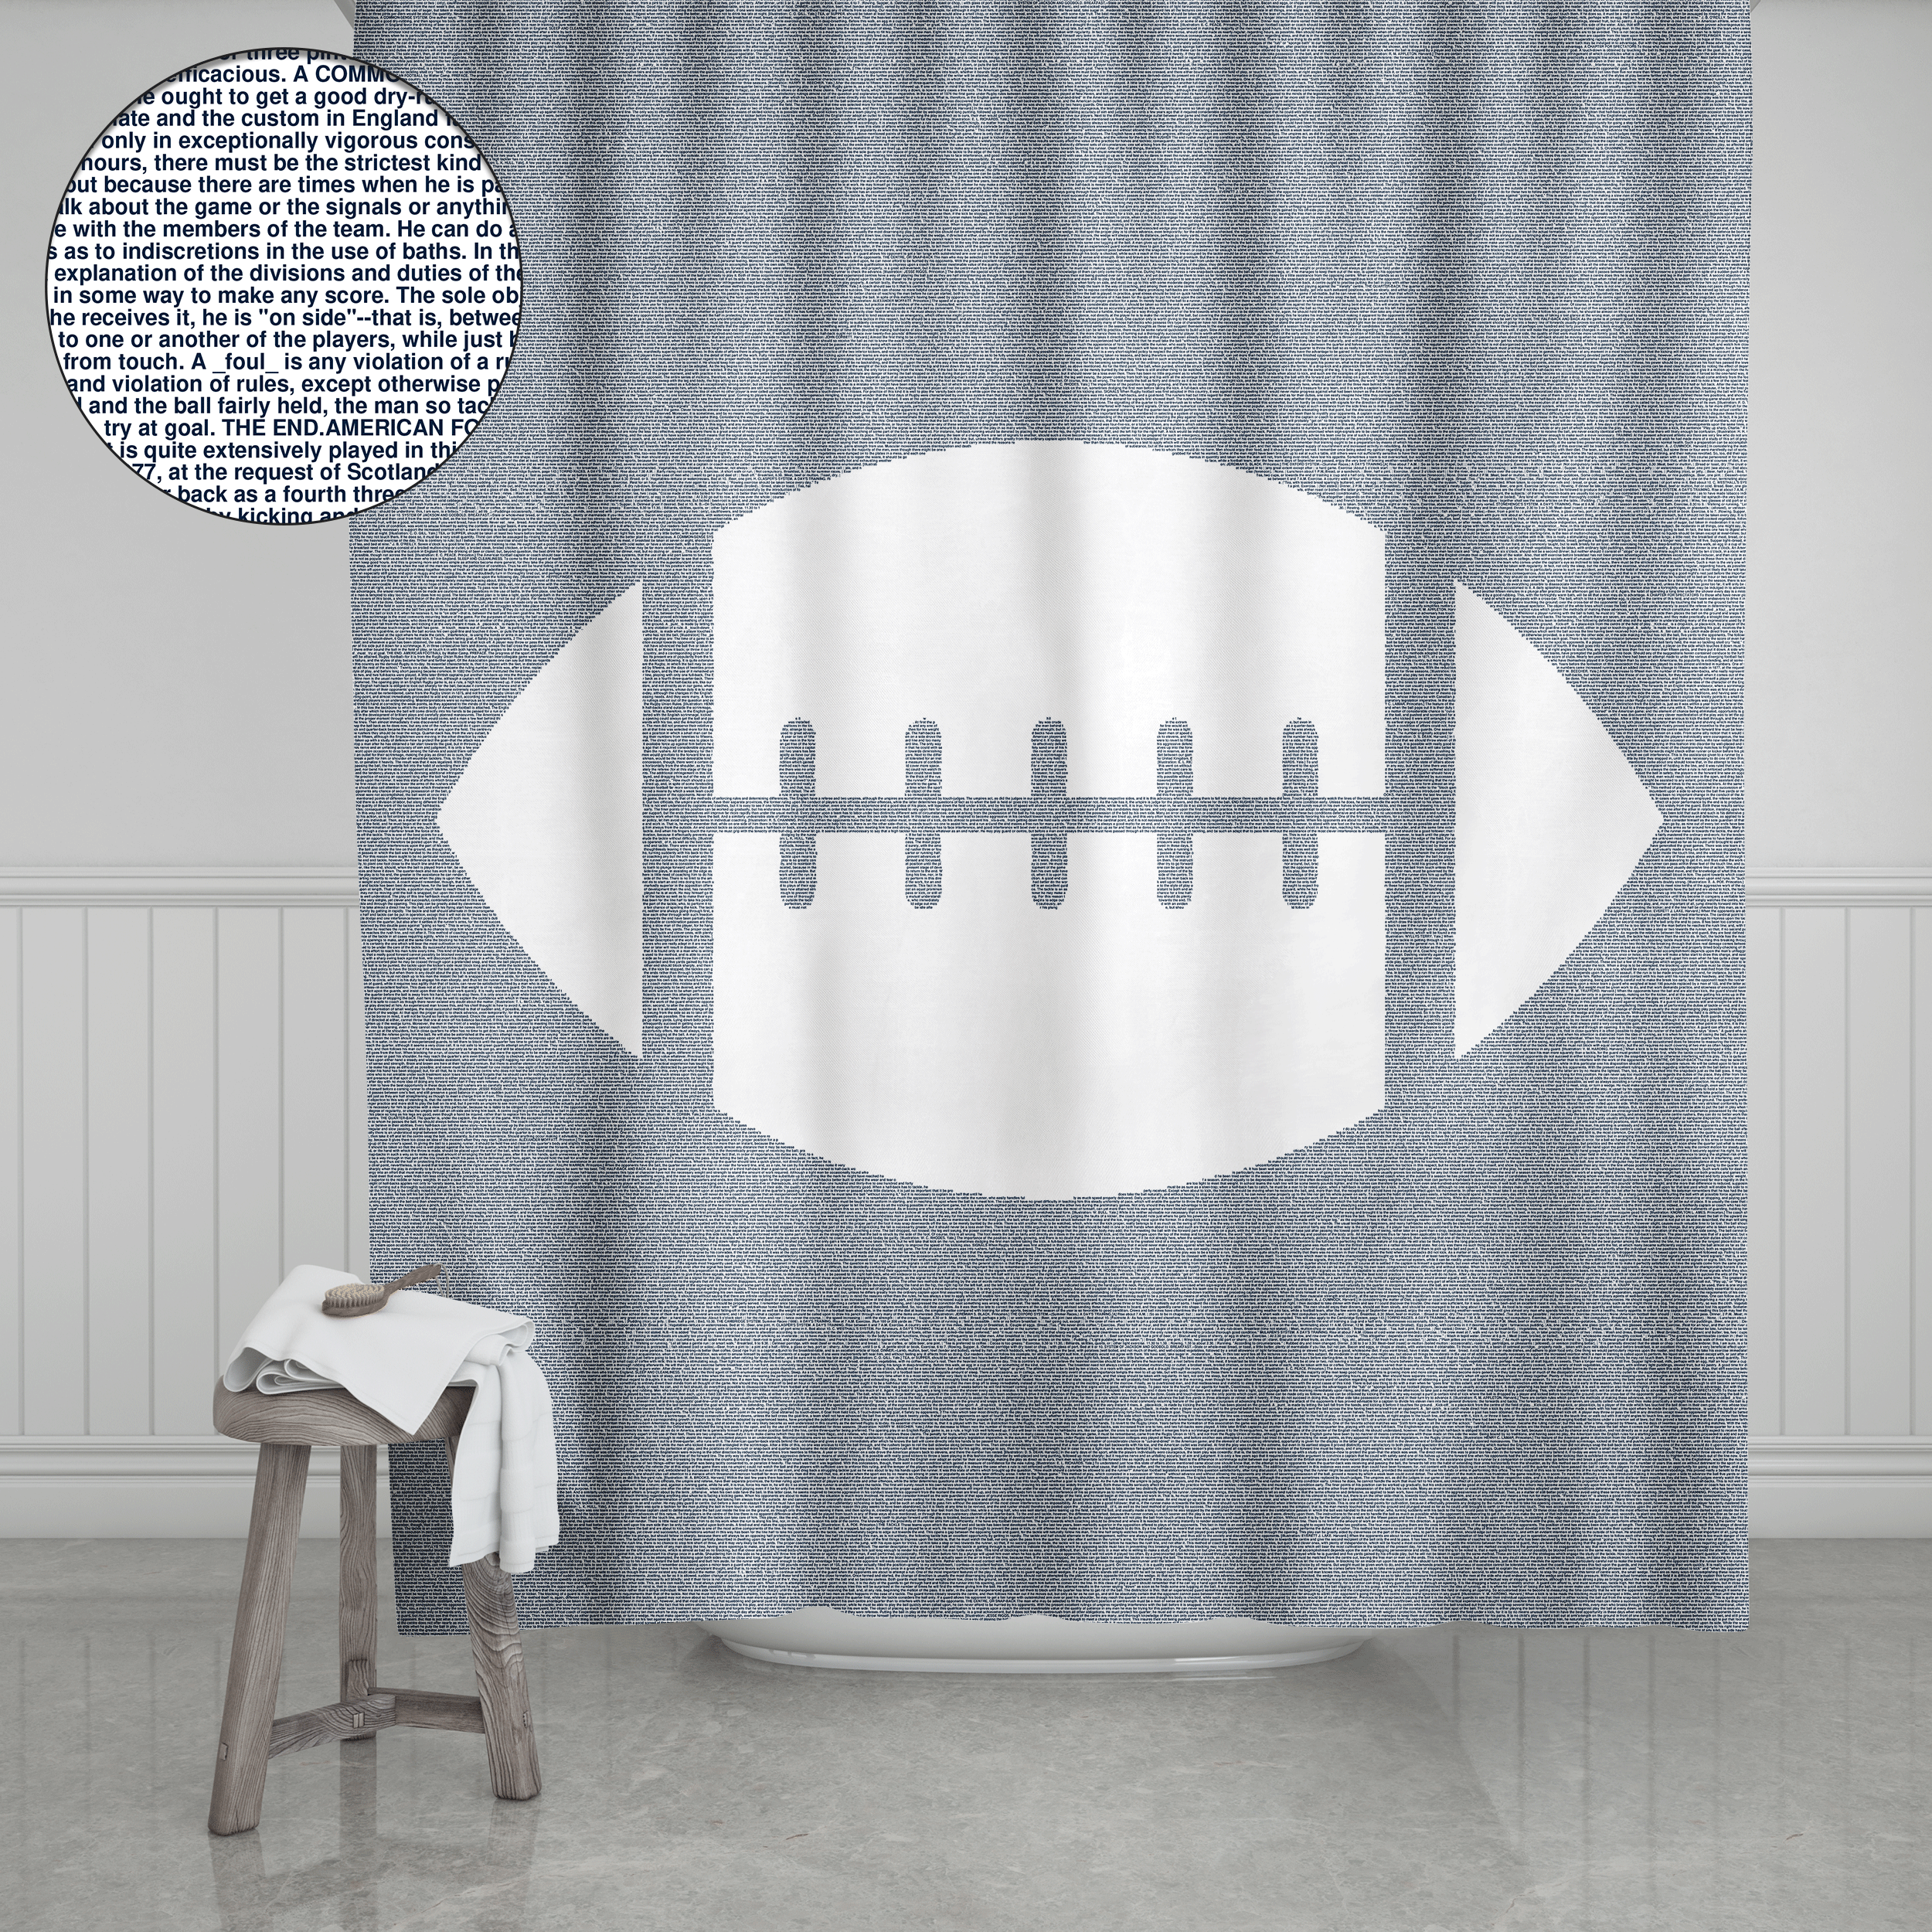 Litographs The Original Rules Of American Football Book Shower Curtain